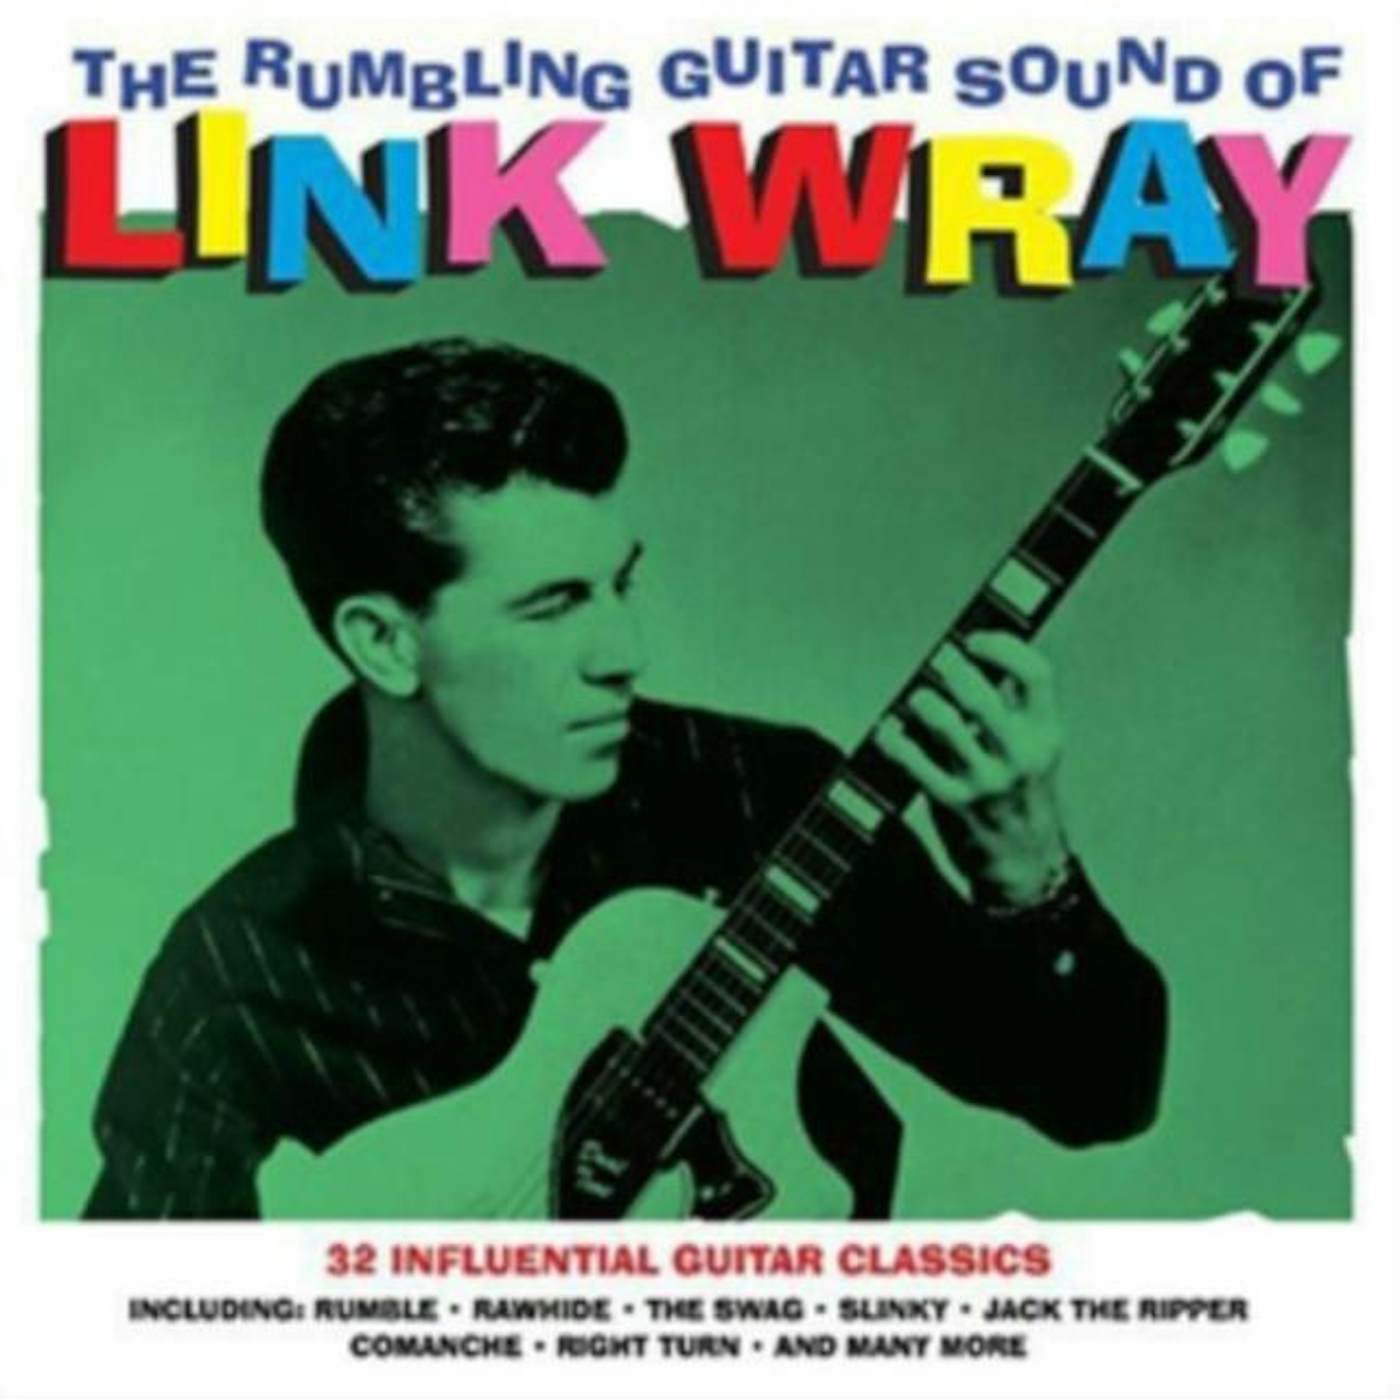 Link Wray LP Vinyl Record - The Rumblin Guitar Sounds Of